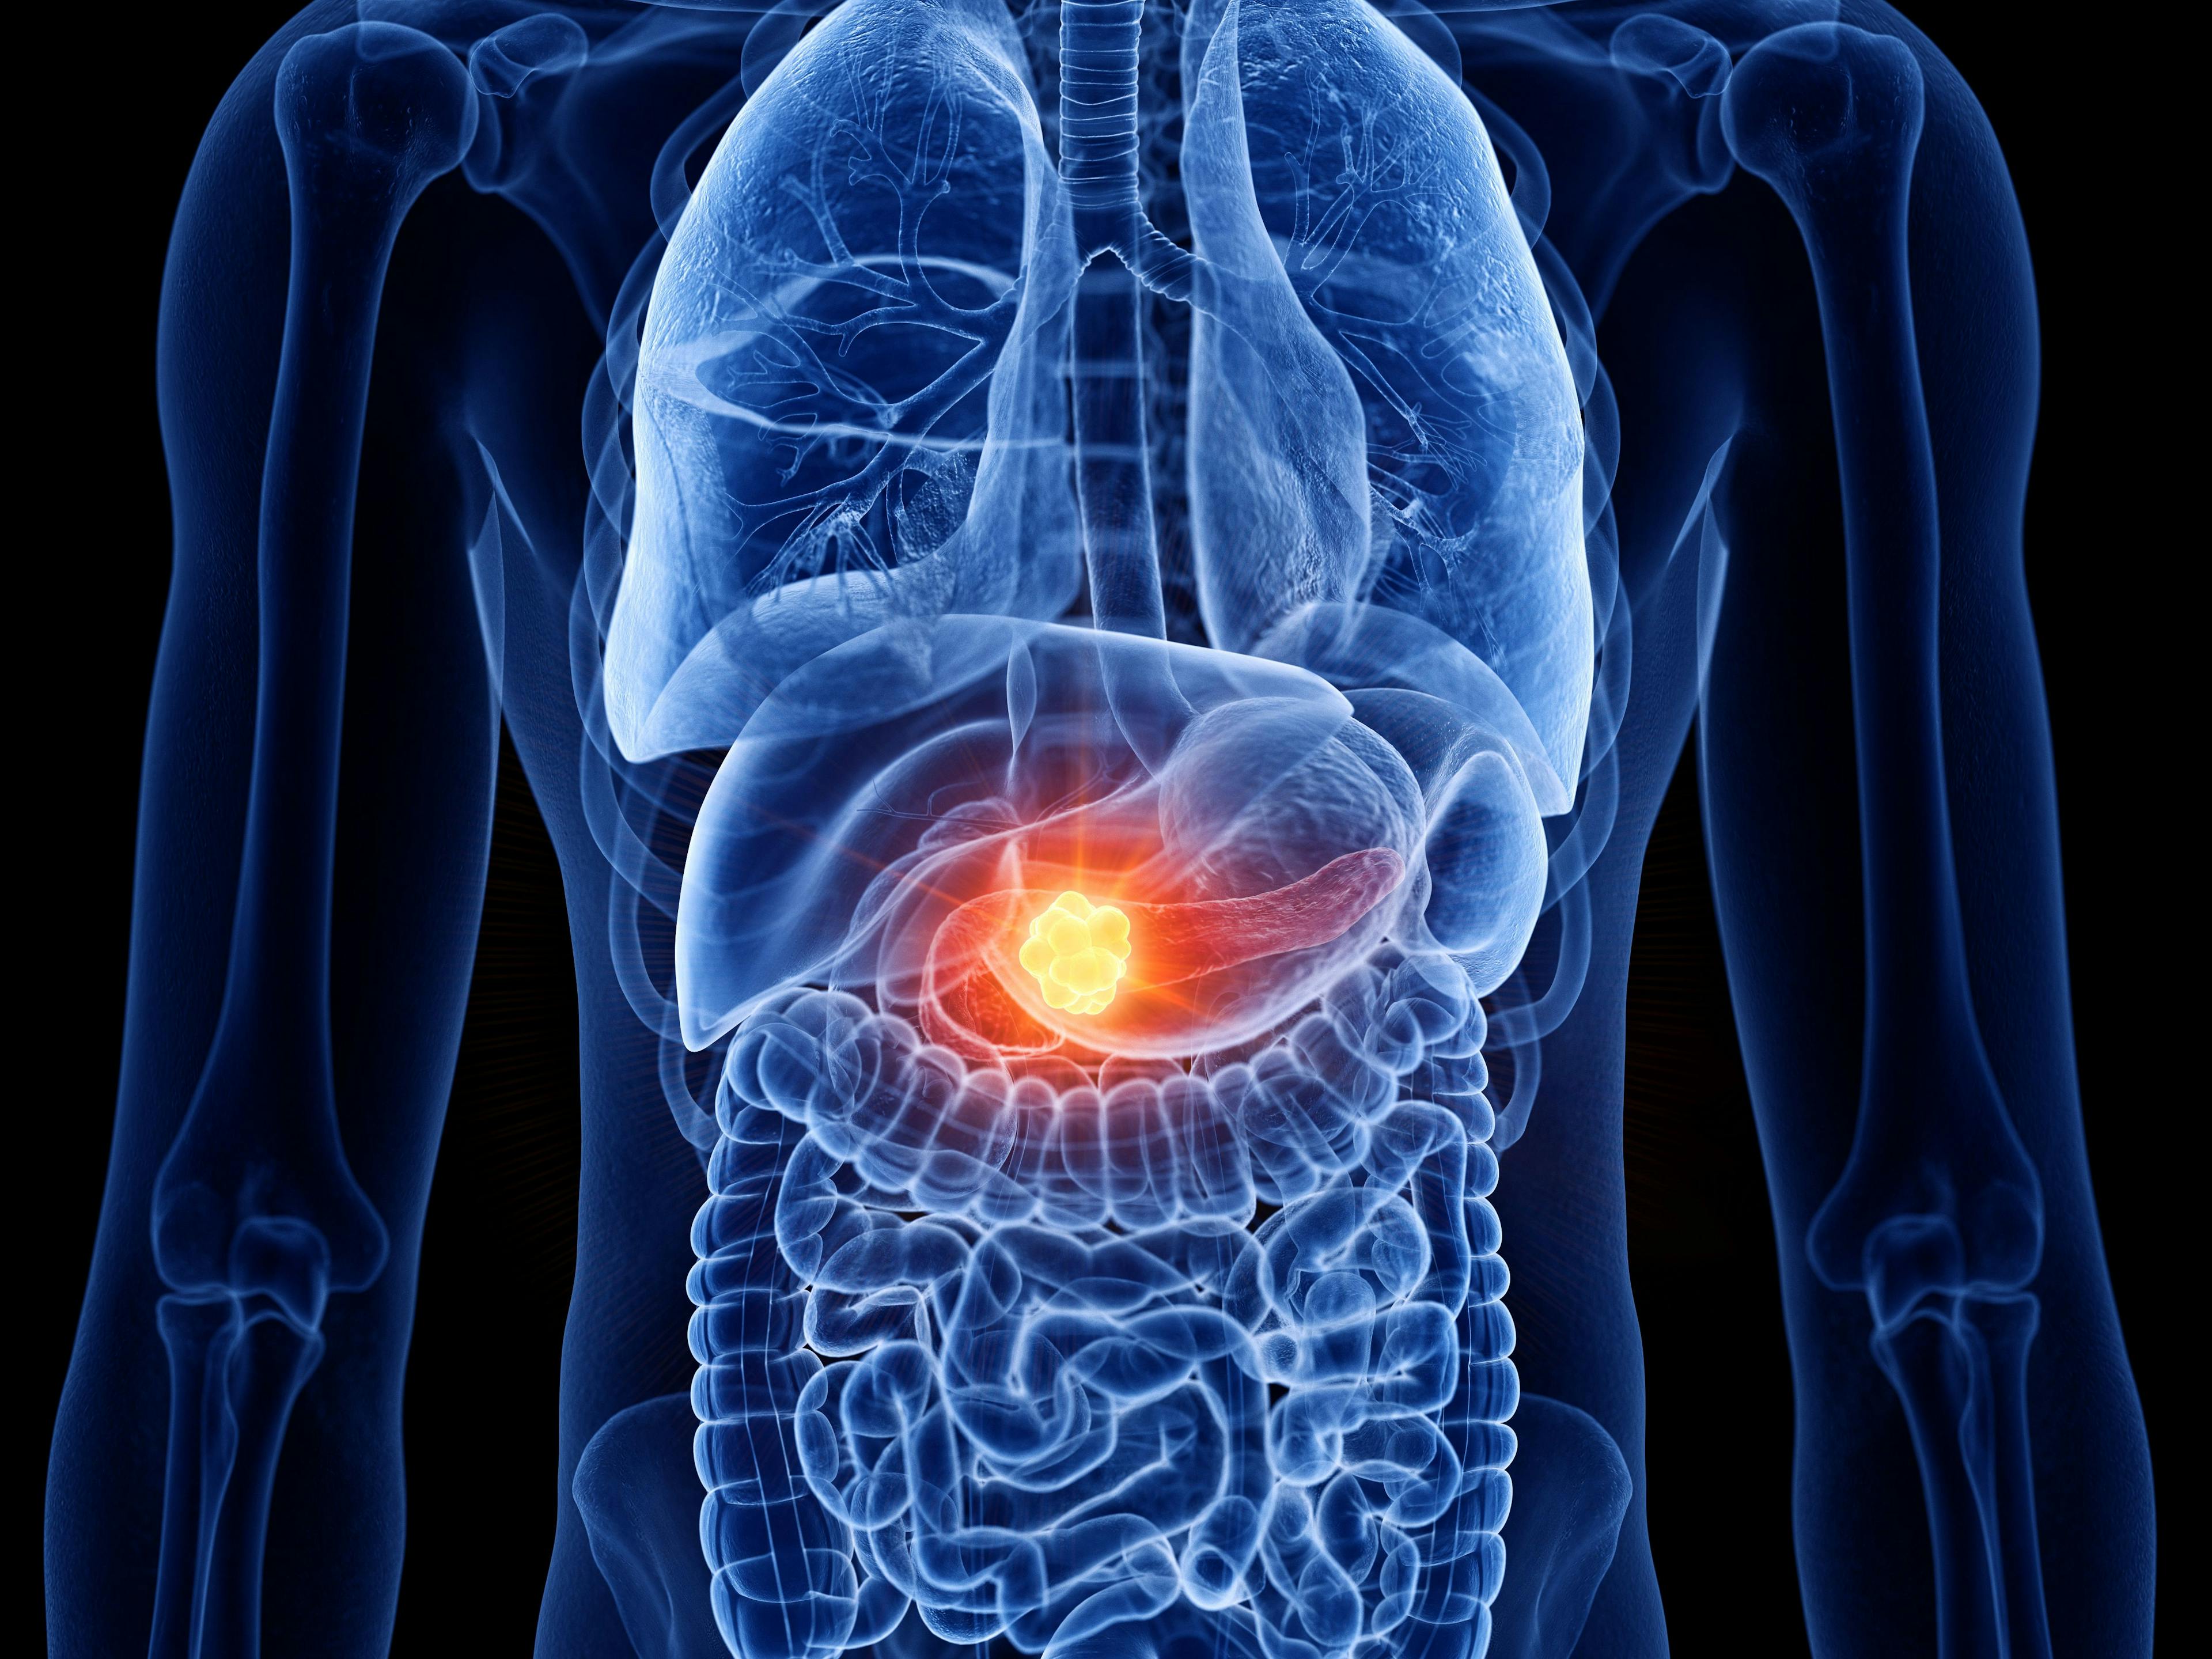 3d rendered medically accurate illustration of pancreas cancer | Image credit: SciePro - © stock.adobe.com